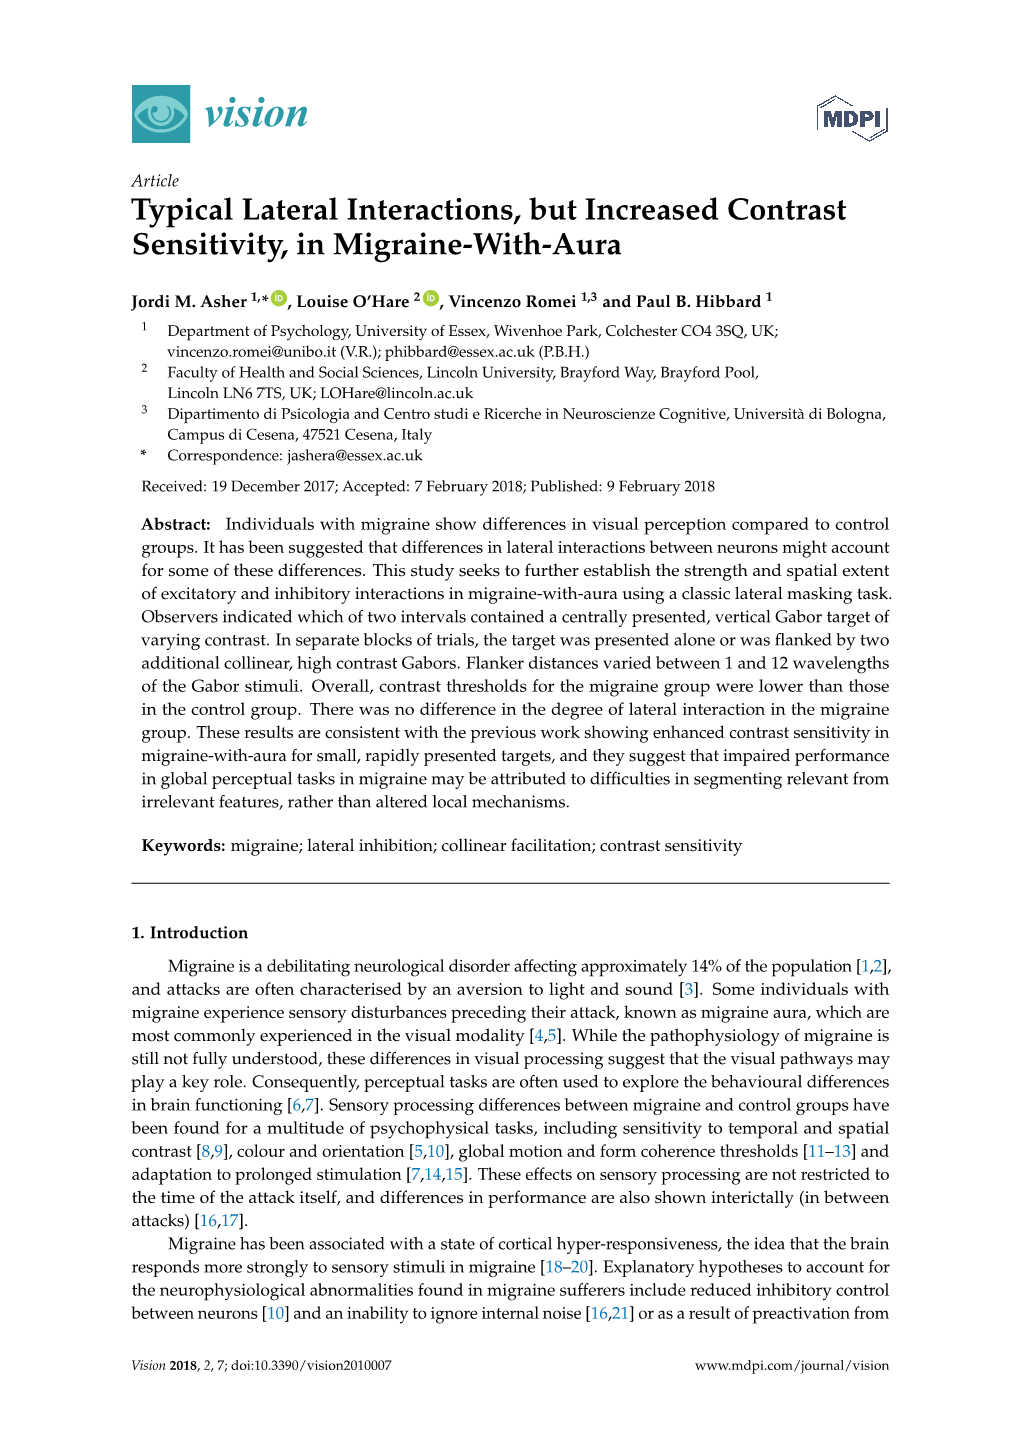 Typical Lateral Interactions, but Increased Contrast Sensitivity, in Migraine-With-Aura